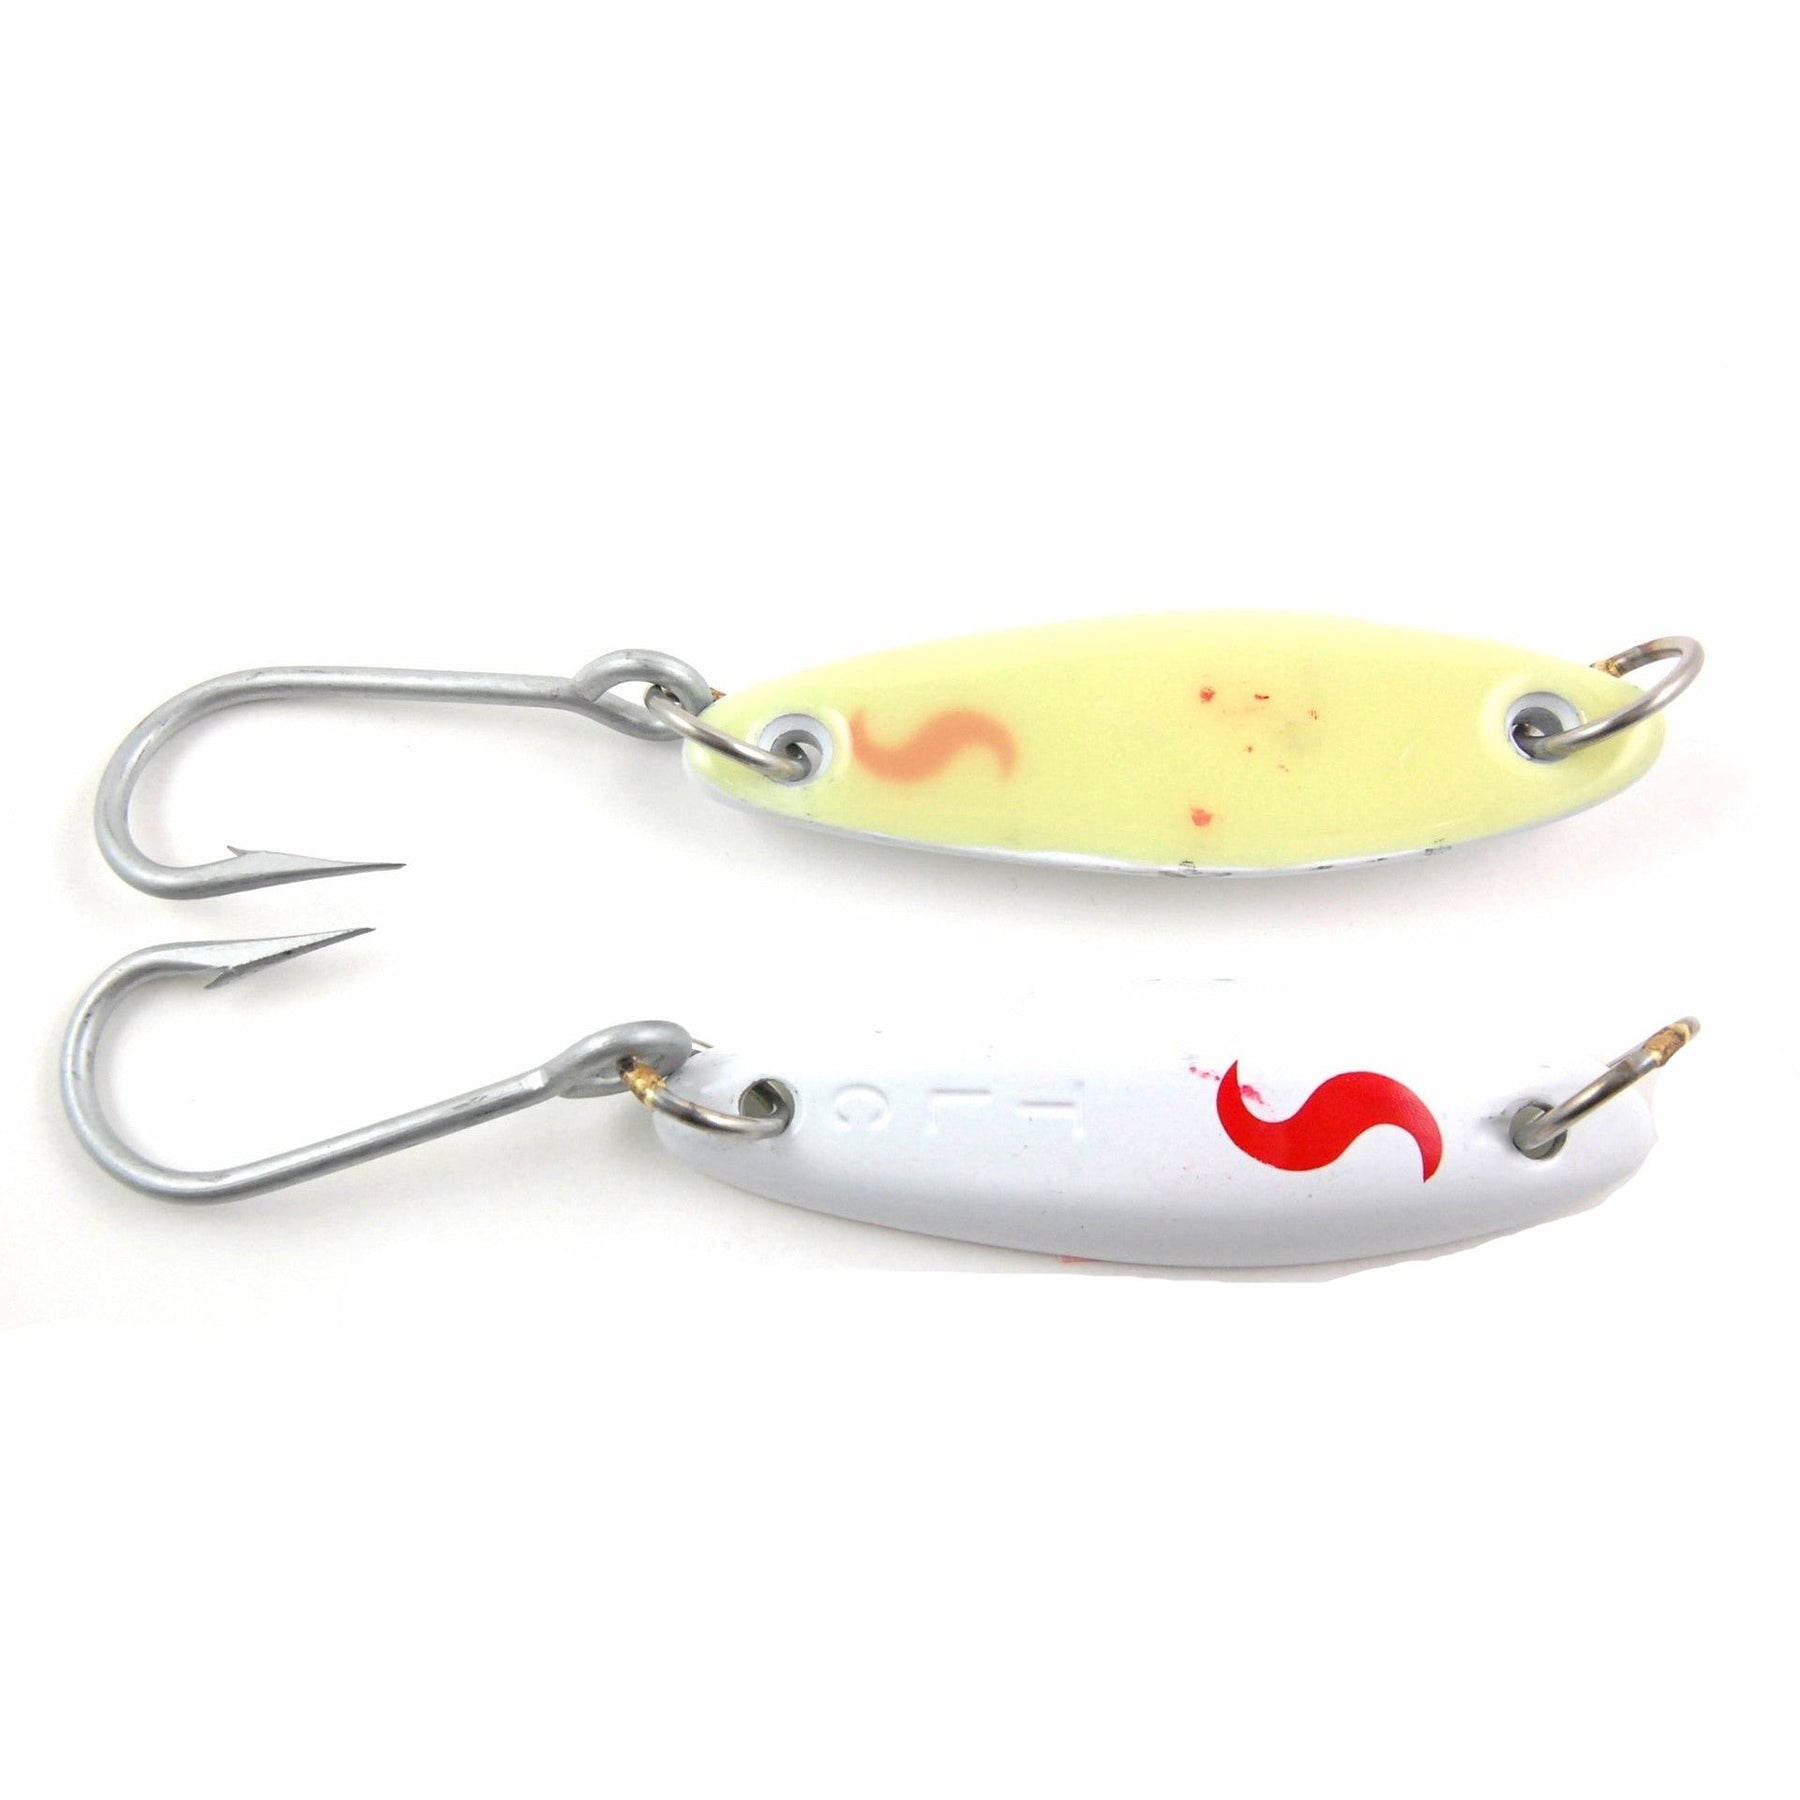 Buy jig lures Online in KUWAIT at Low Prices at desertcart